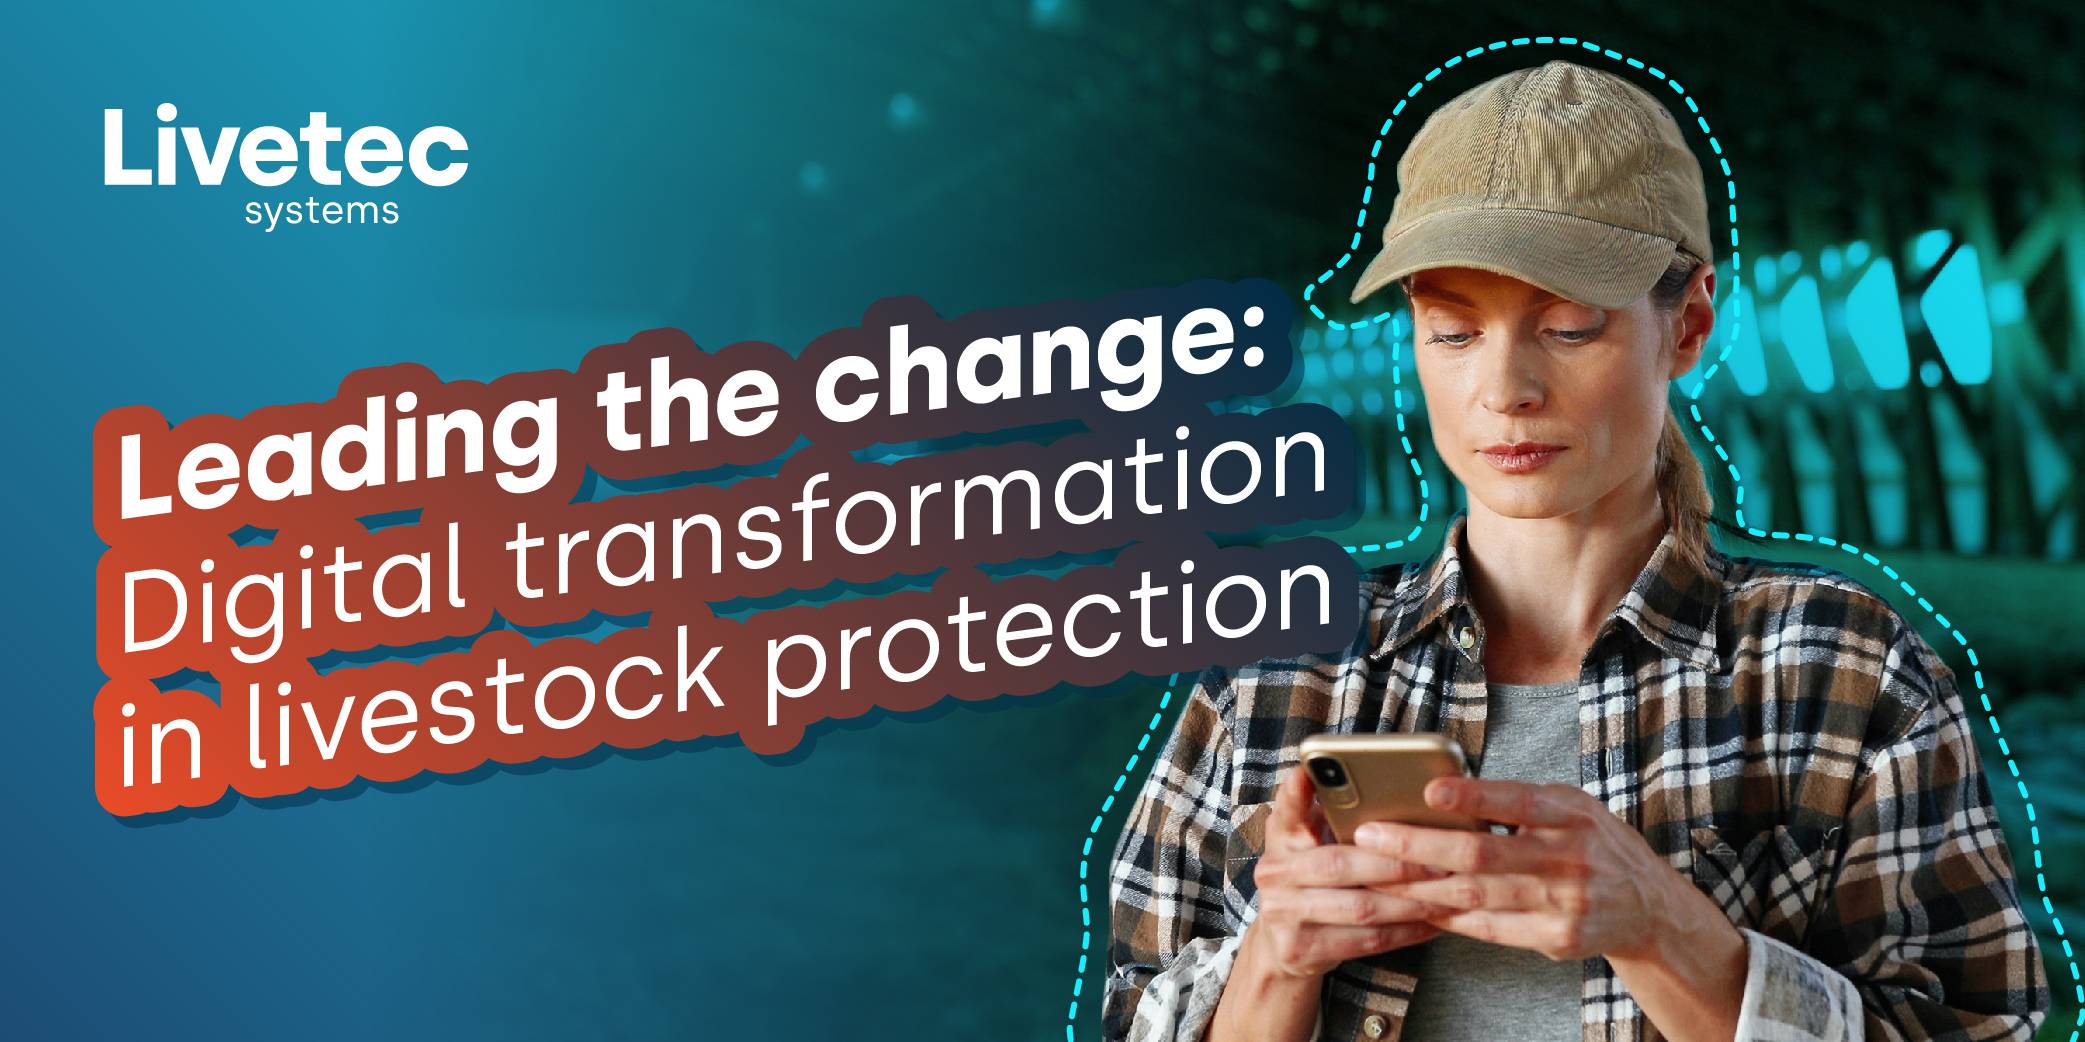 Digital transformation of livestock protection, leading the change with compliance, bird flu outbreaks, historical timelines